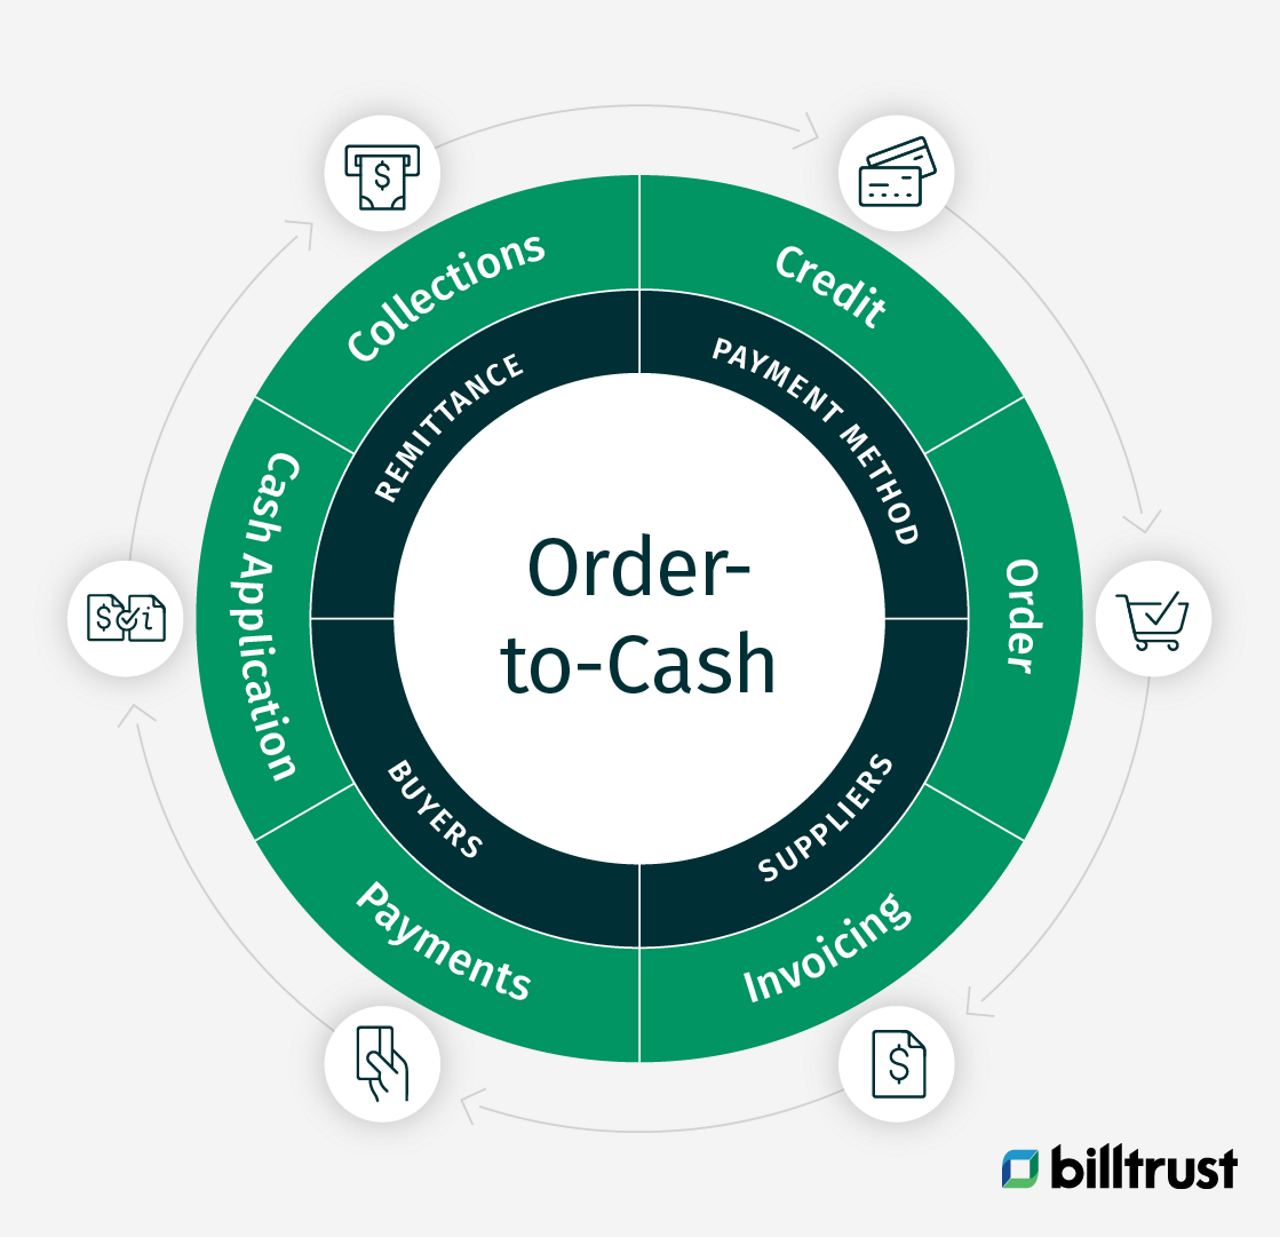 Credit, Order, Invoicing, Payments and Cash Application, Collections form part of the Order to Cash Cycle.